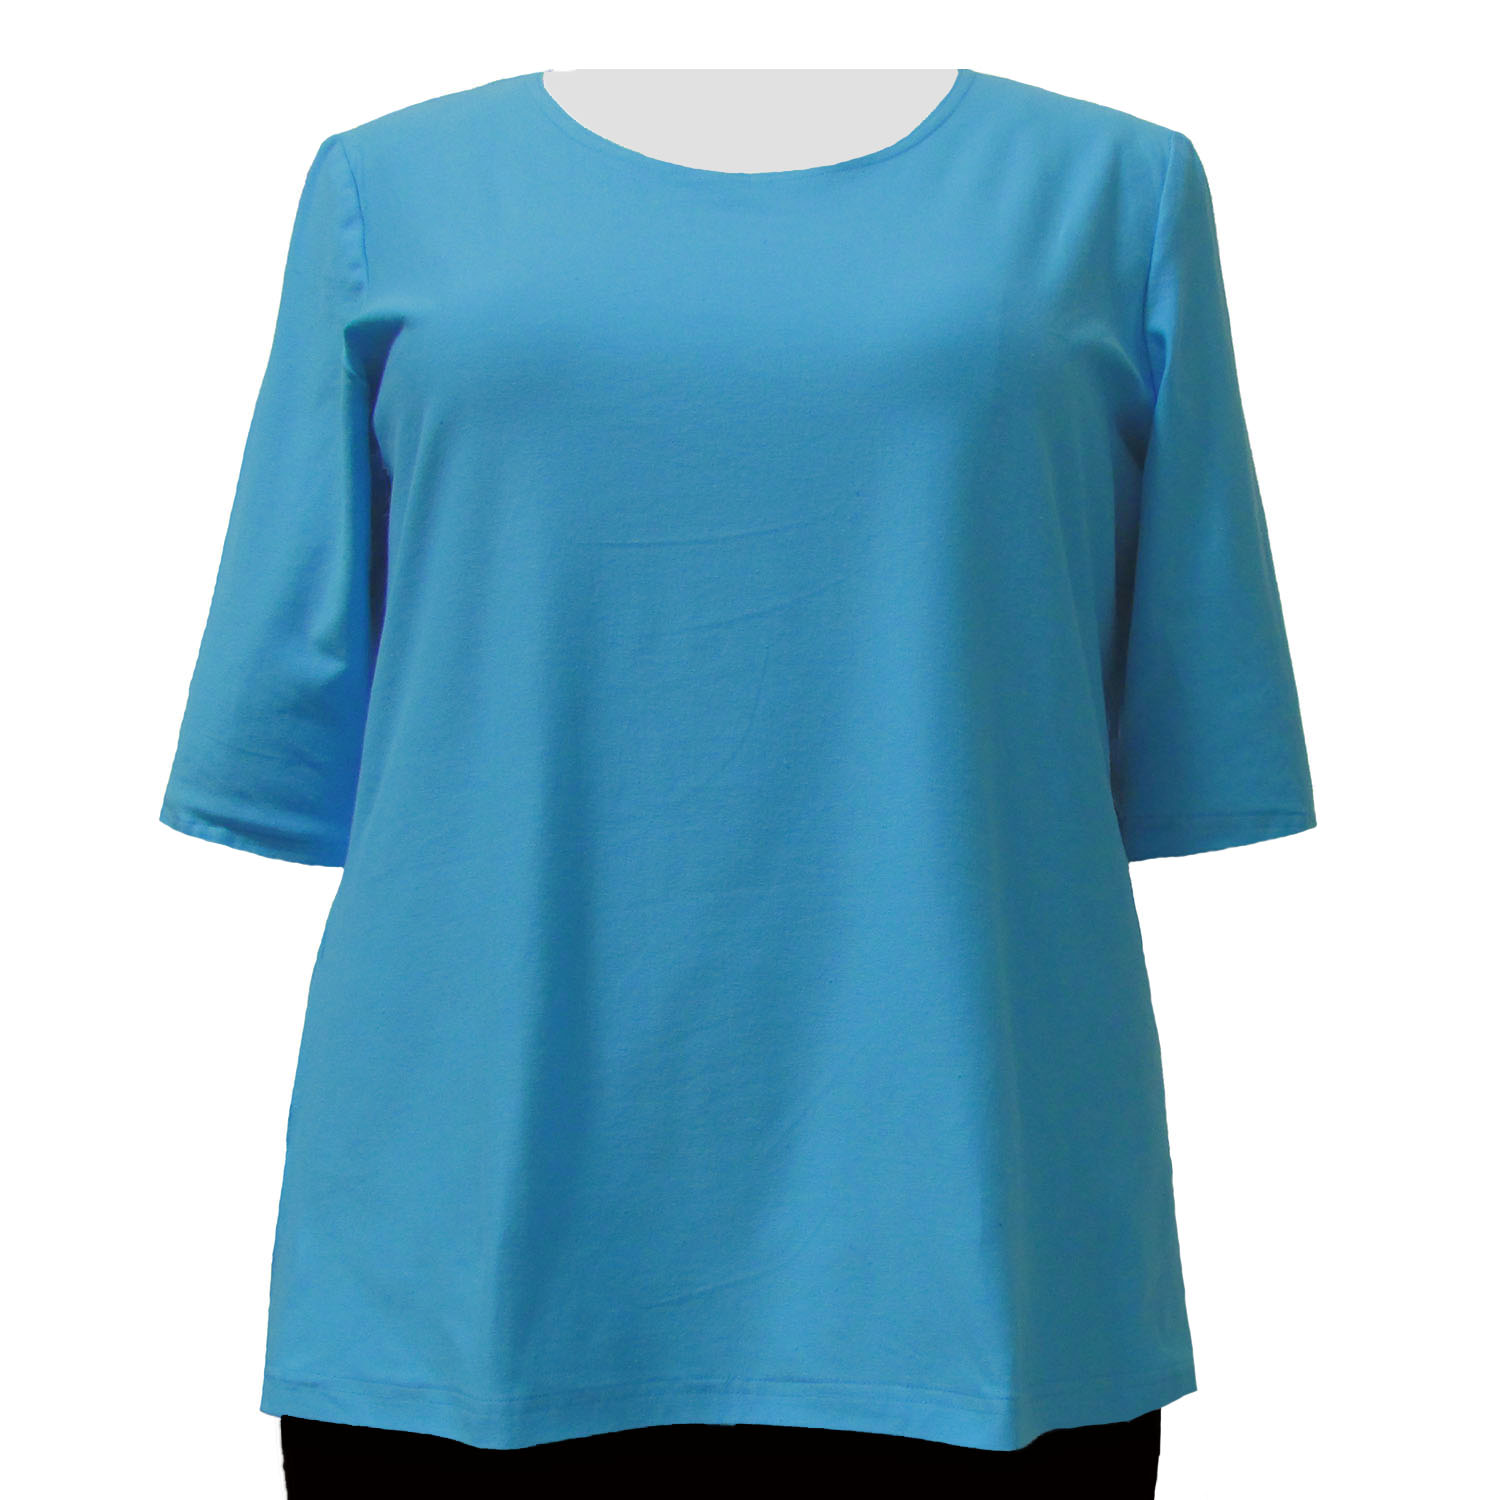 A Personal Touch Women's Plus Size Turquoise Cotton Knit 3/4 Sleeve Round Neck Pullover Top - 0X